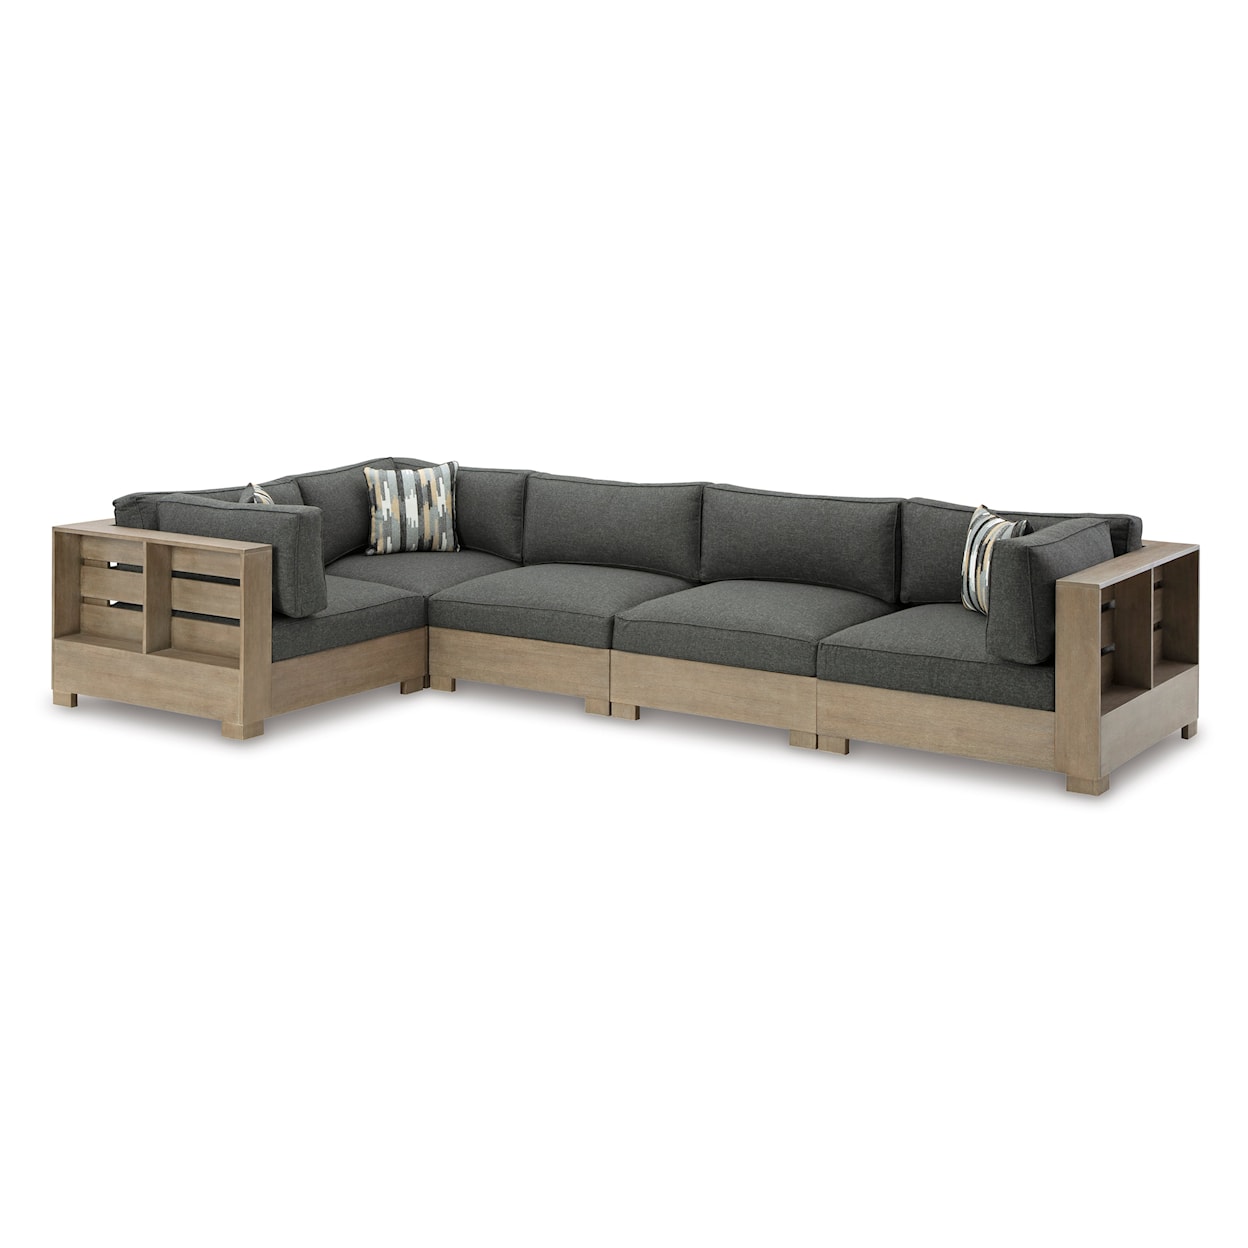 Signature Design by Ashley Citrine Park Outdoor Sectional Sofa